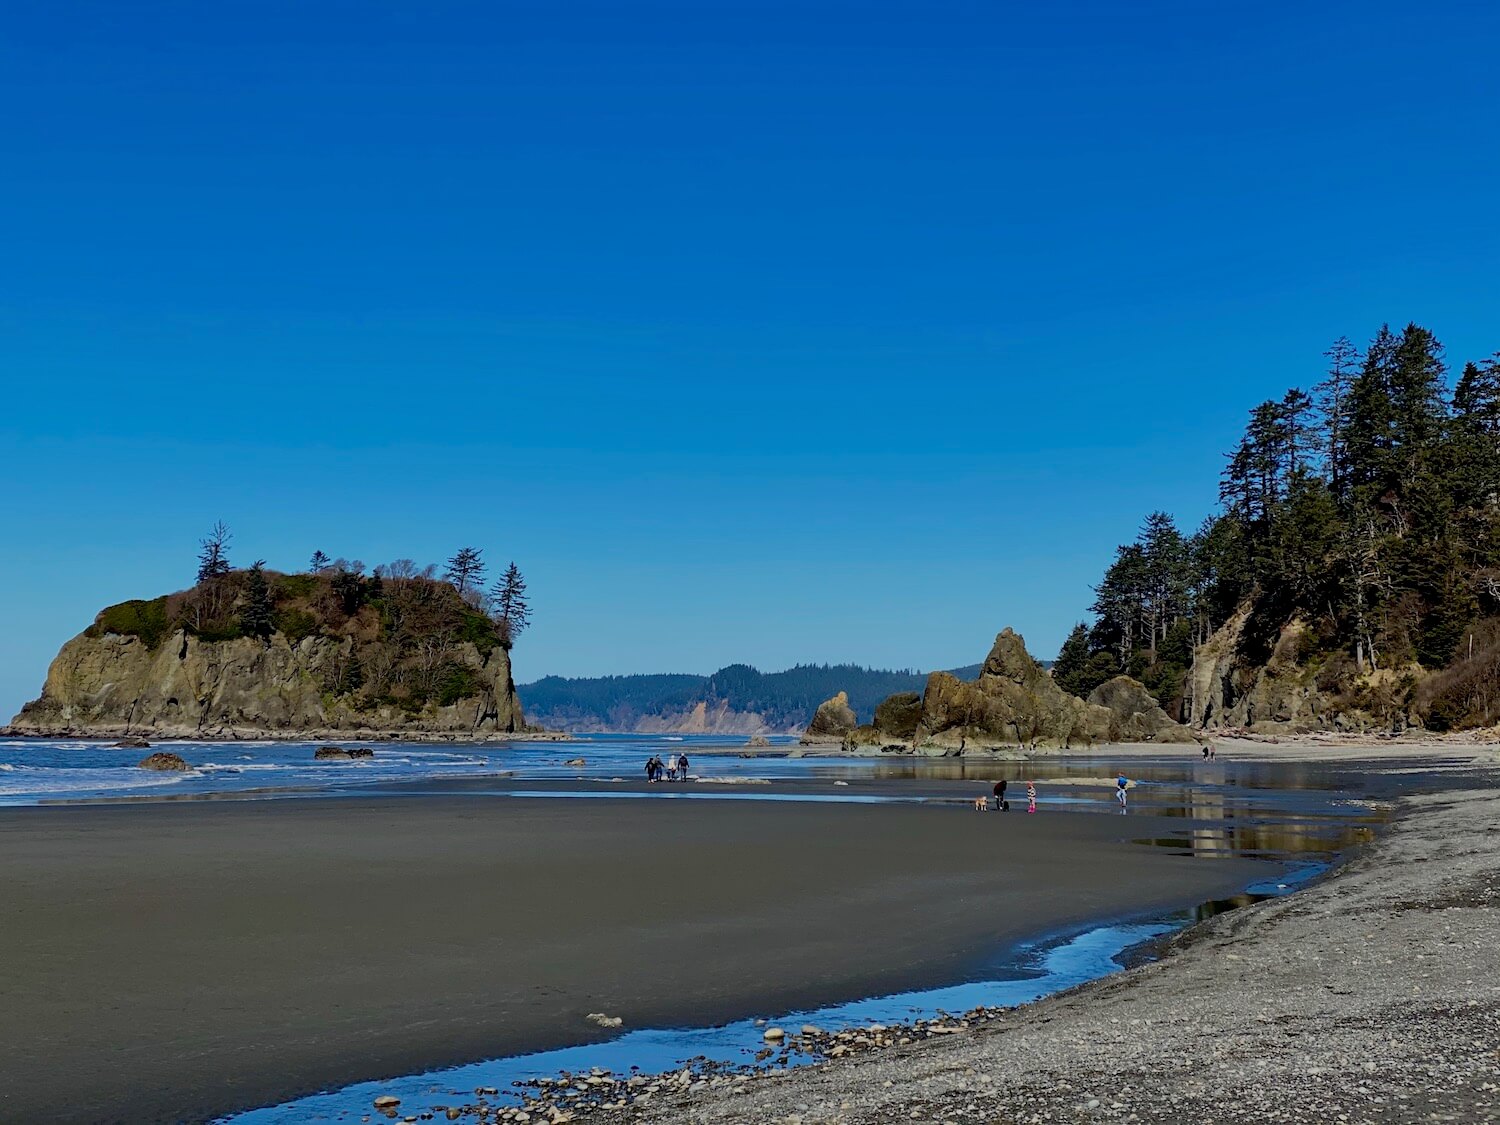 Any getaway to a Washington State beach requires exploring the beach.  The waves lightly roll onto a low tide sandy swath of Ruby Beach on the Washignton Coast. Pine and fir trees lead cover a hill on one side while an island pops up in the water and around the island with trees clinging to life atop the island. The water is blue with white caps and dark blue land carries out on the skyline with a completely clear blue sky above the Pacific Ocean.